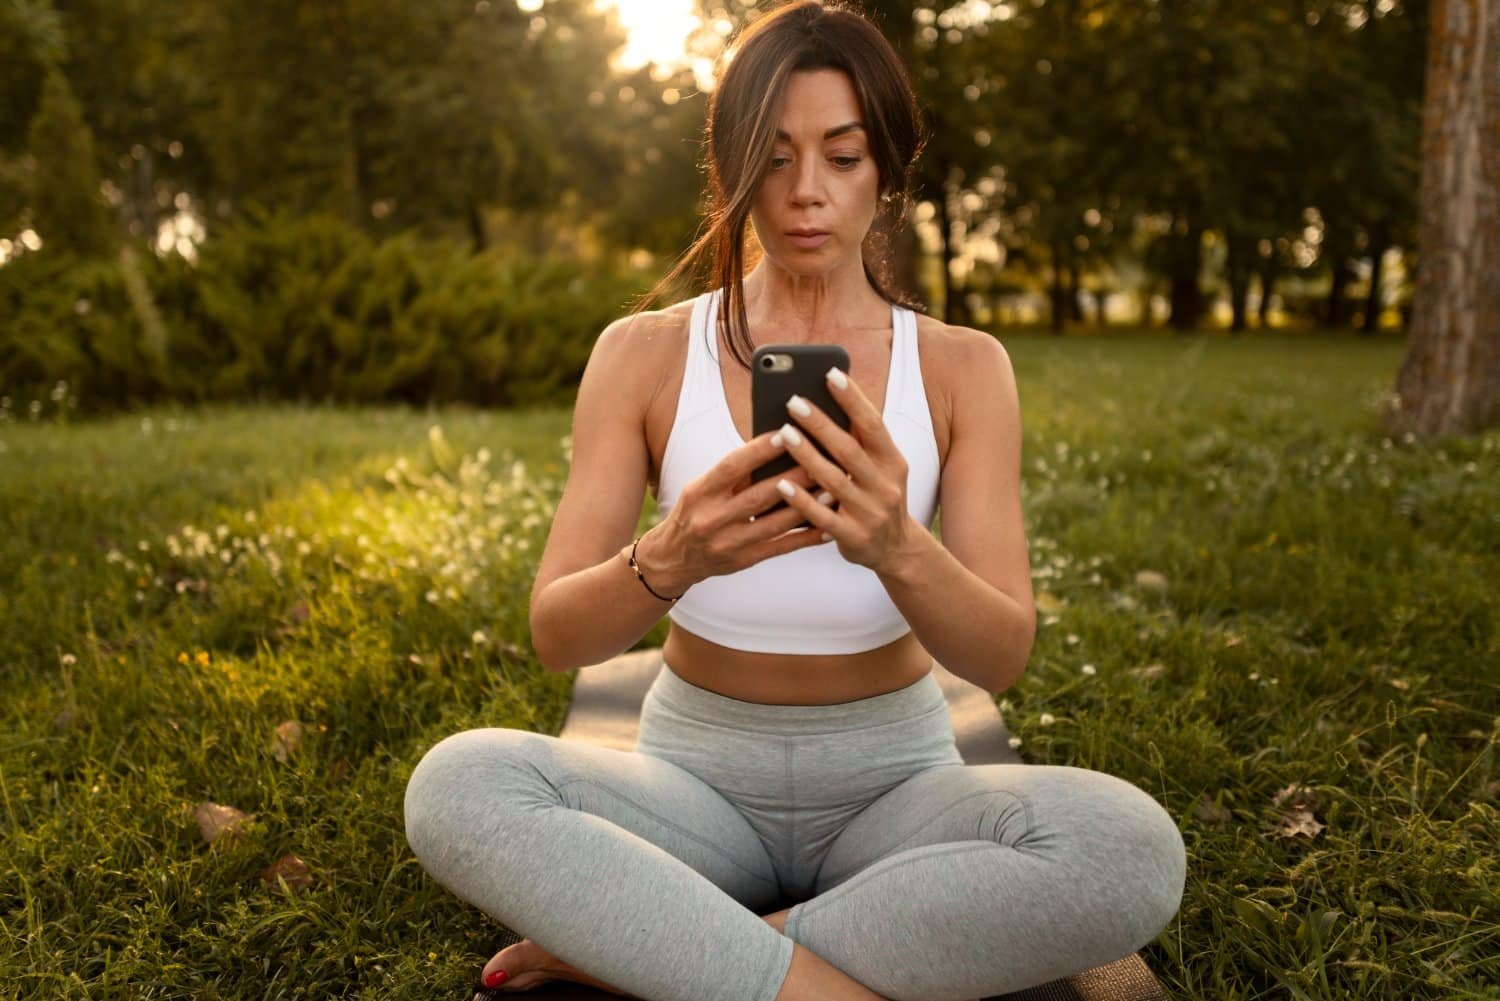 You are currently viewing Mobile Phones and Mental Health: Finding Balance